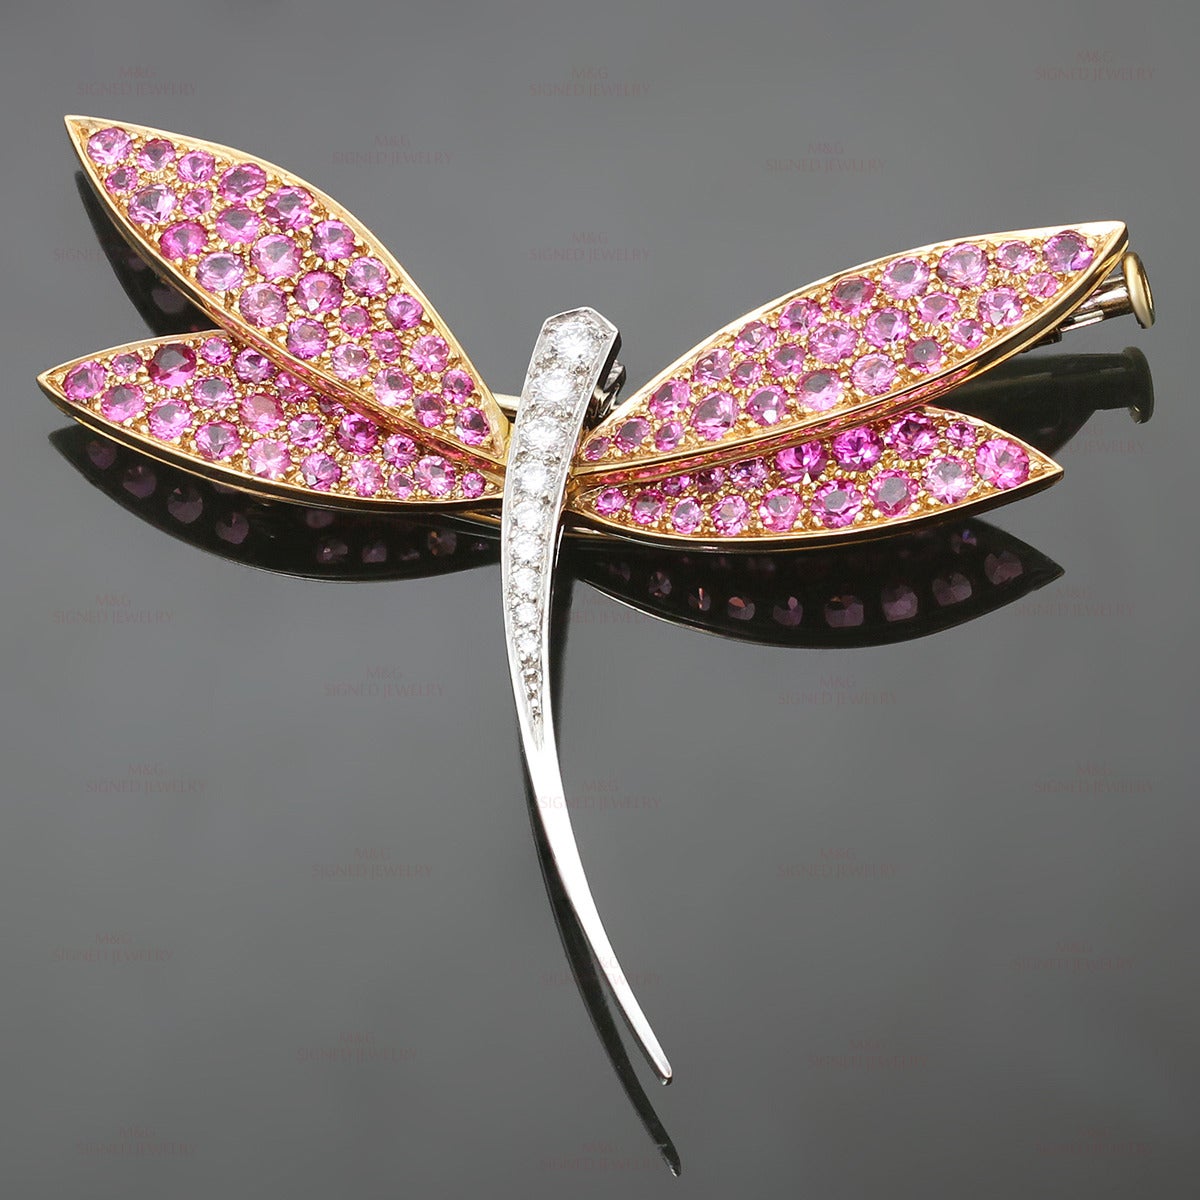 This magnificent Van Cleef & Arpels brooch is crafted in the shape of a dragonfly and set with faceted pink sapphire wings in 18k rose gold and brilliant-cut round white diamond body in 18k white gold. The D-E VVS1-VVS2 diamonds weigh an estimated